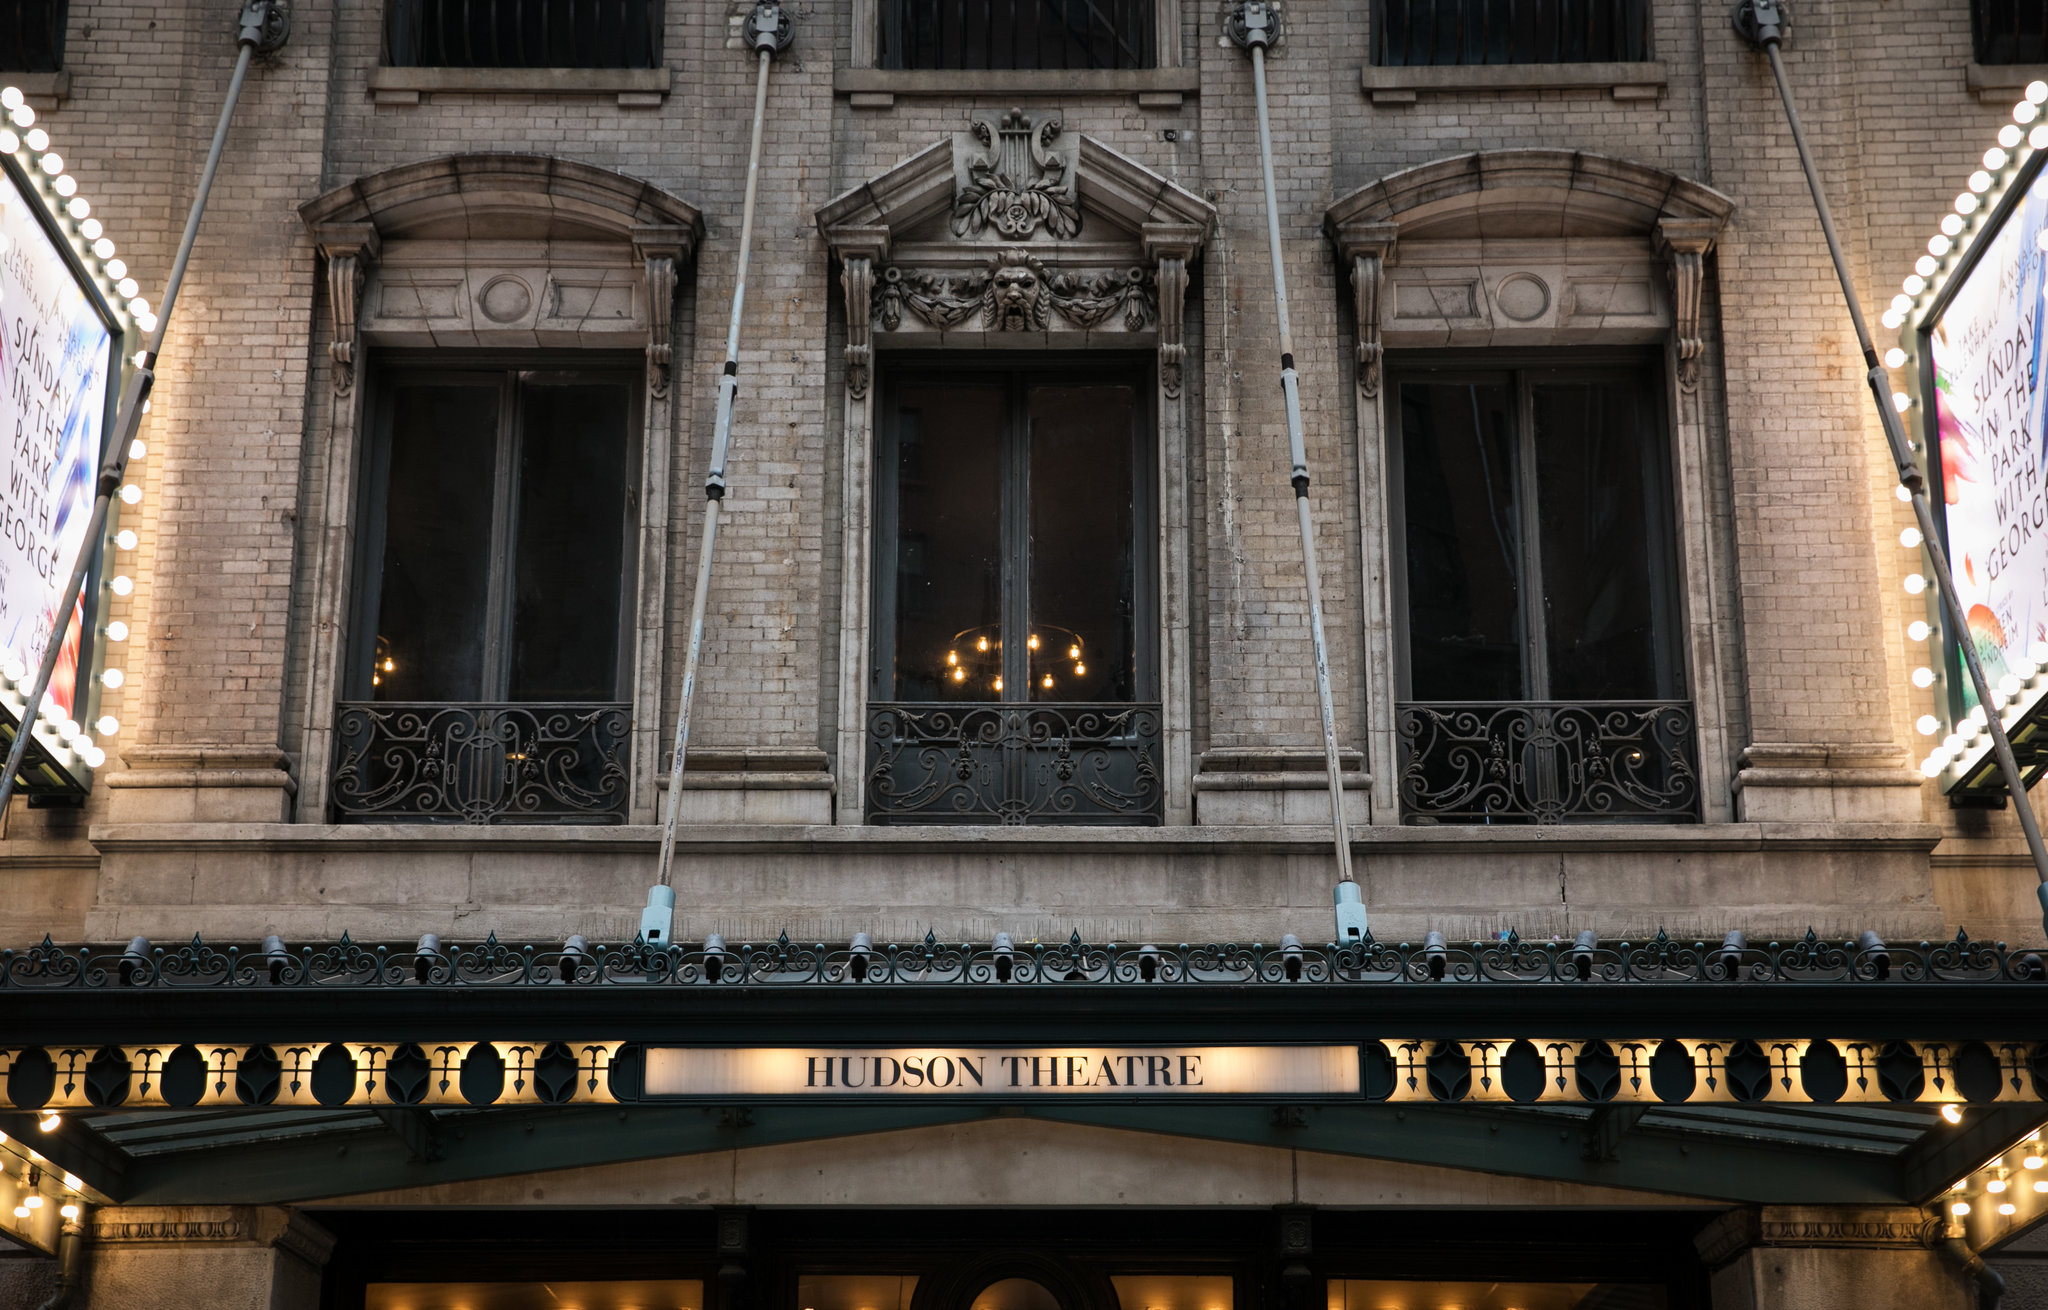 The exterior of the Hudson Theater on 44th Street.CreditTodd Heisler/The New York Times